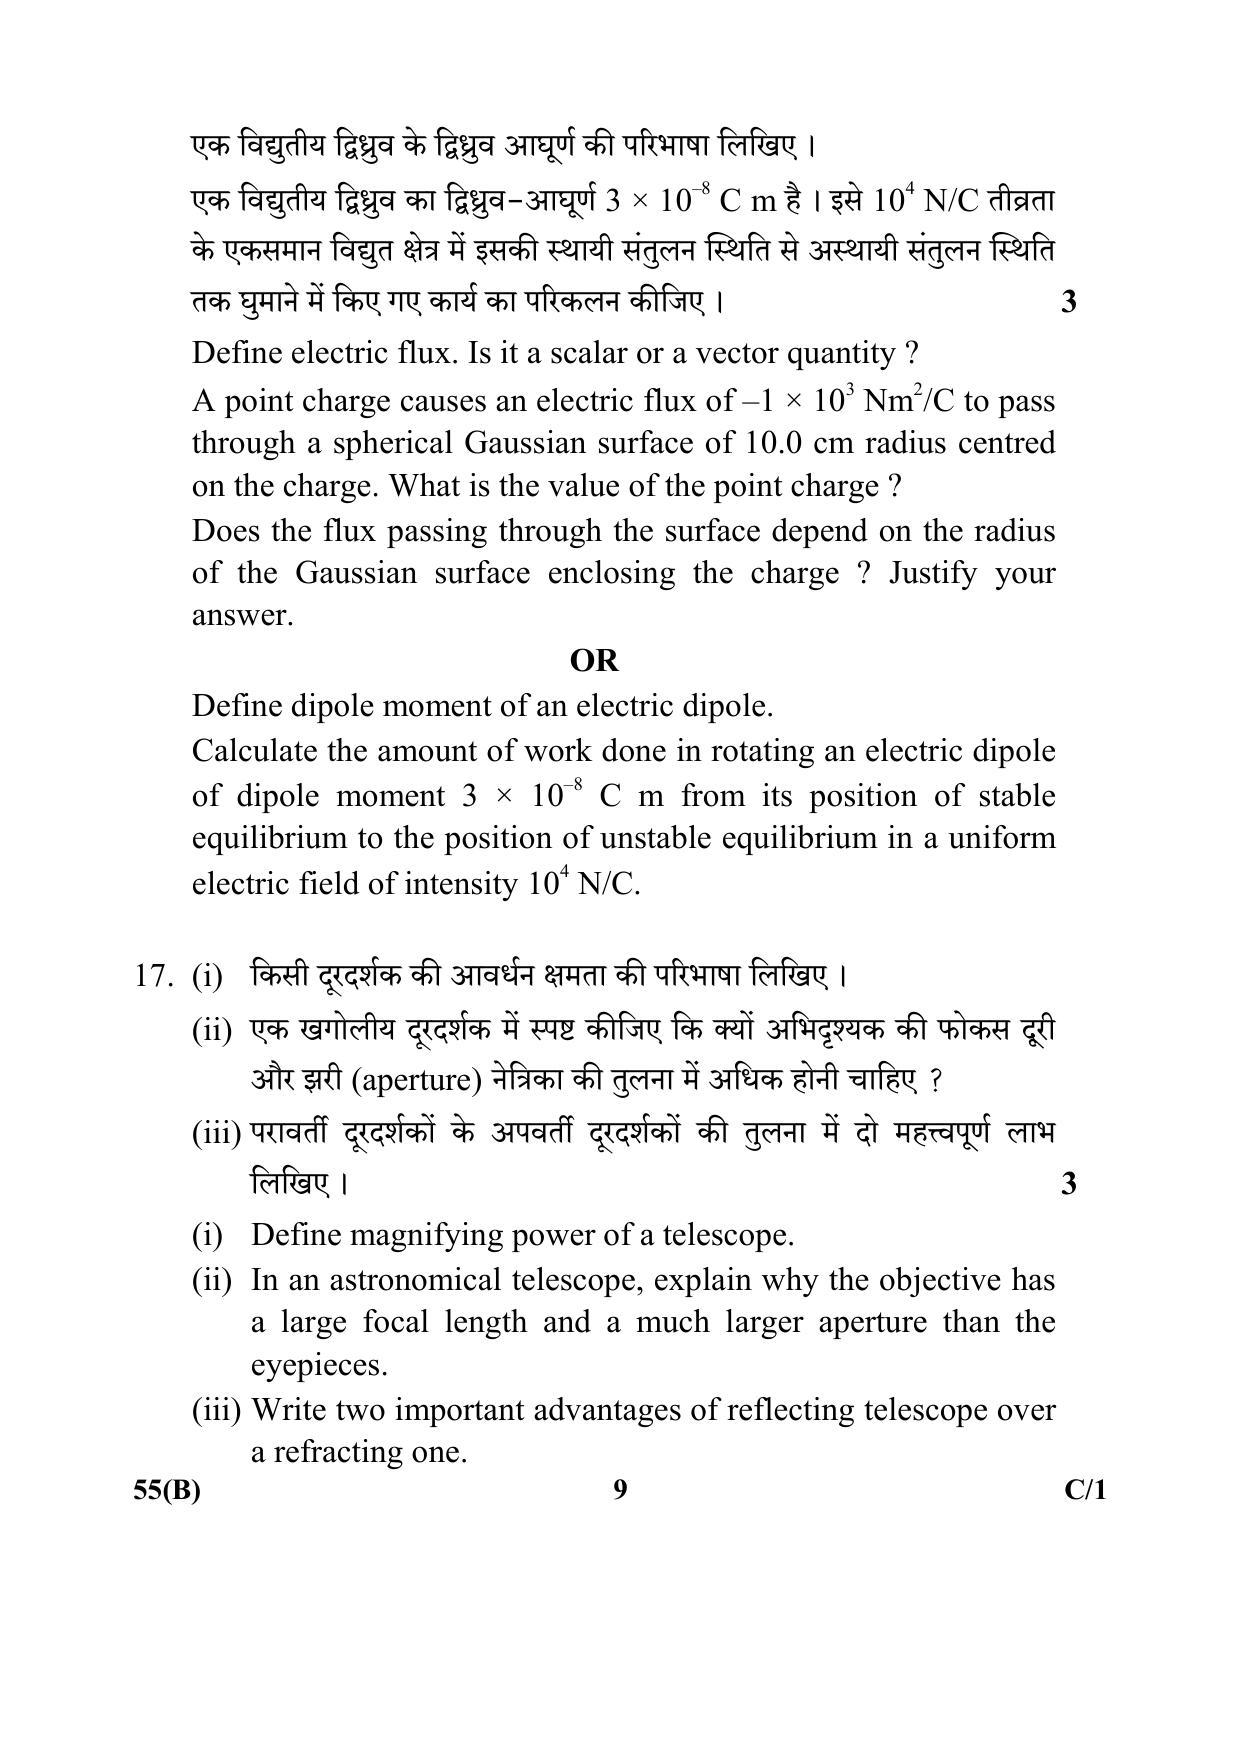 CBSE Class 12 55(B) (Physics) 2018 Compartment Question Paper - Page 9